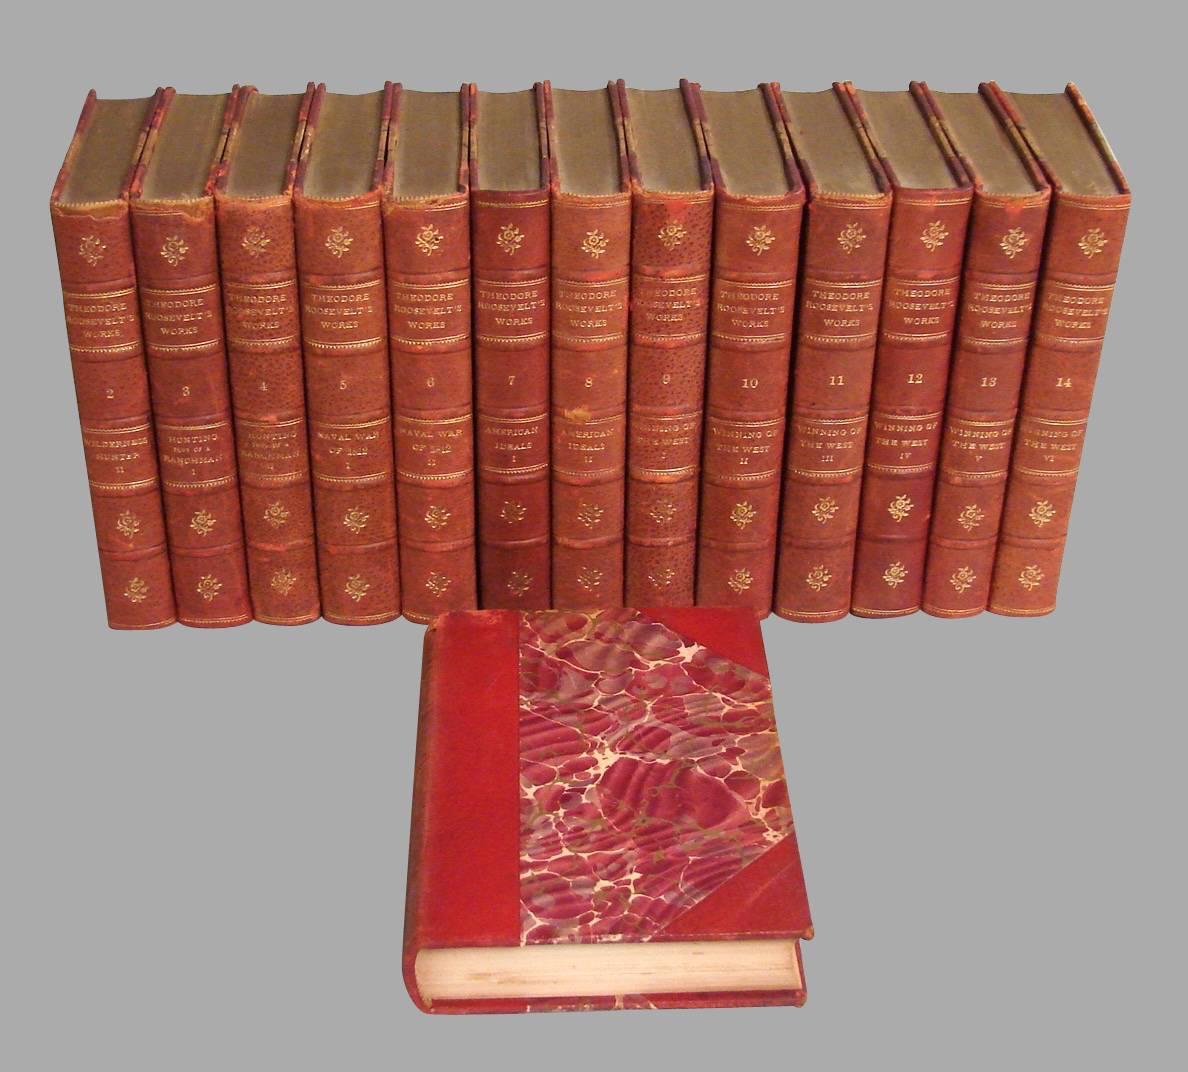 A complete set of the works of Theodore Roosevelt in 14 volumes bound in 3/4 red morocco with raised spines, published by G.P. Putnam's Sons, 1915.
  